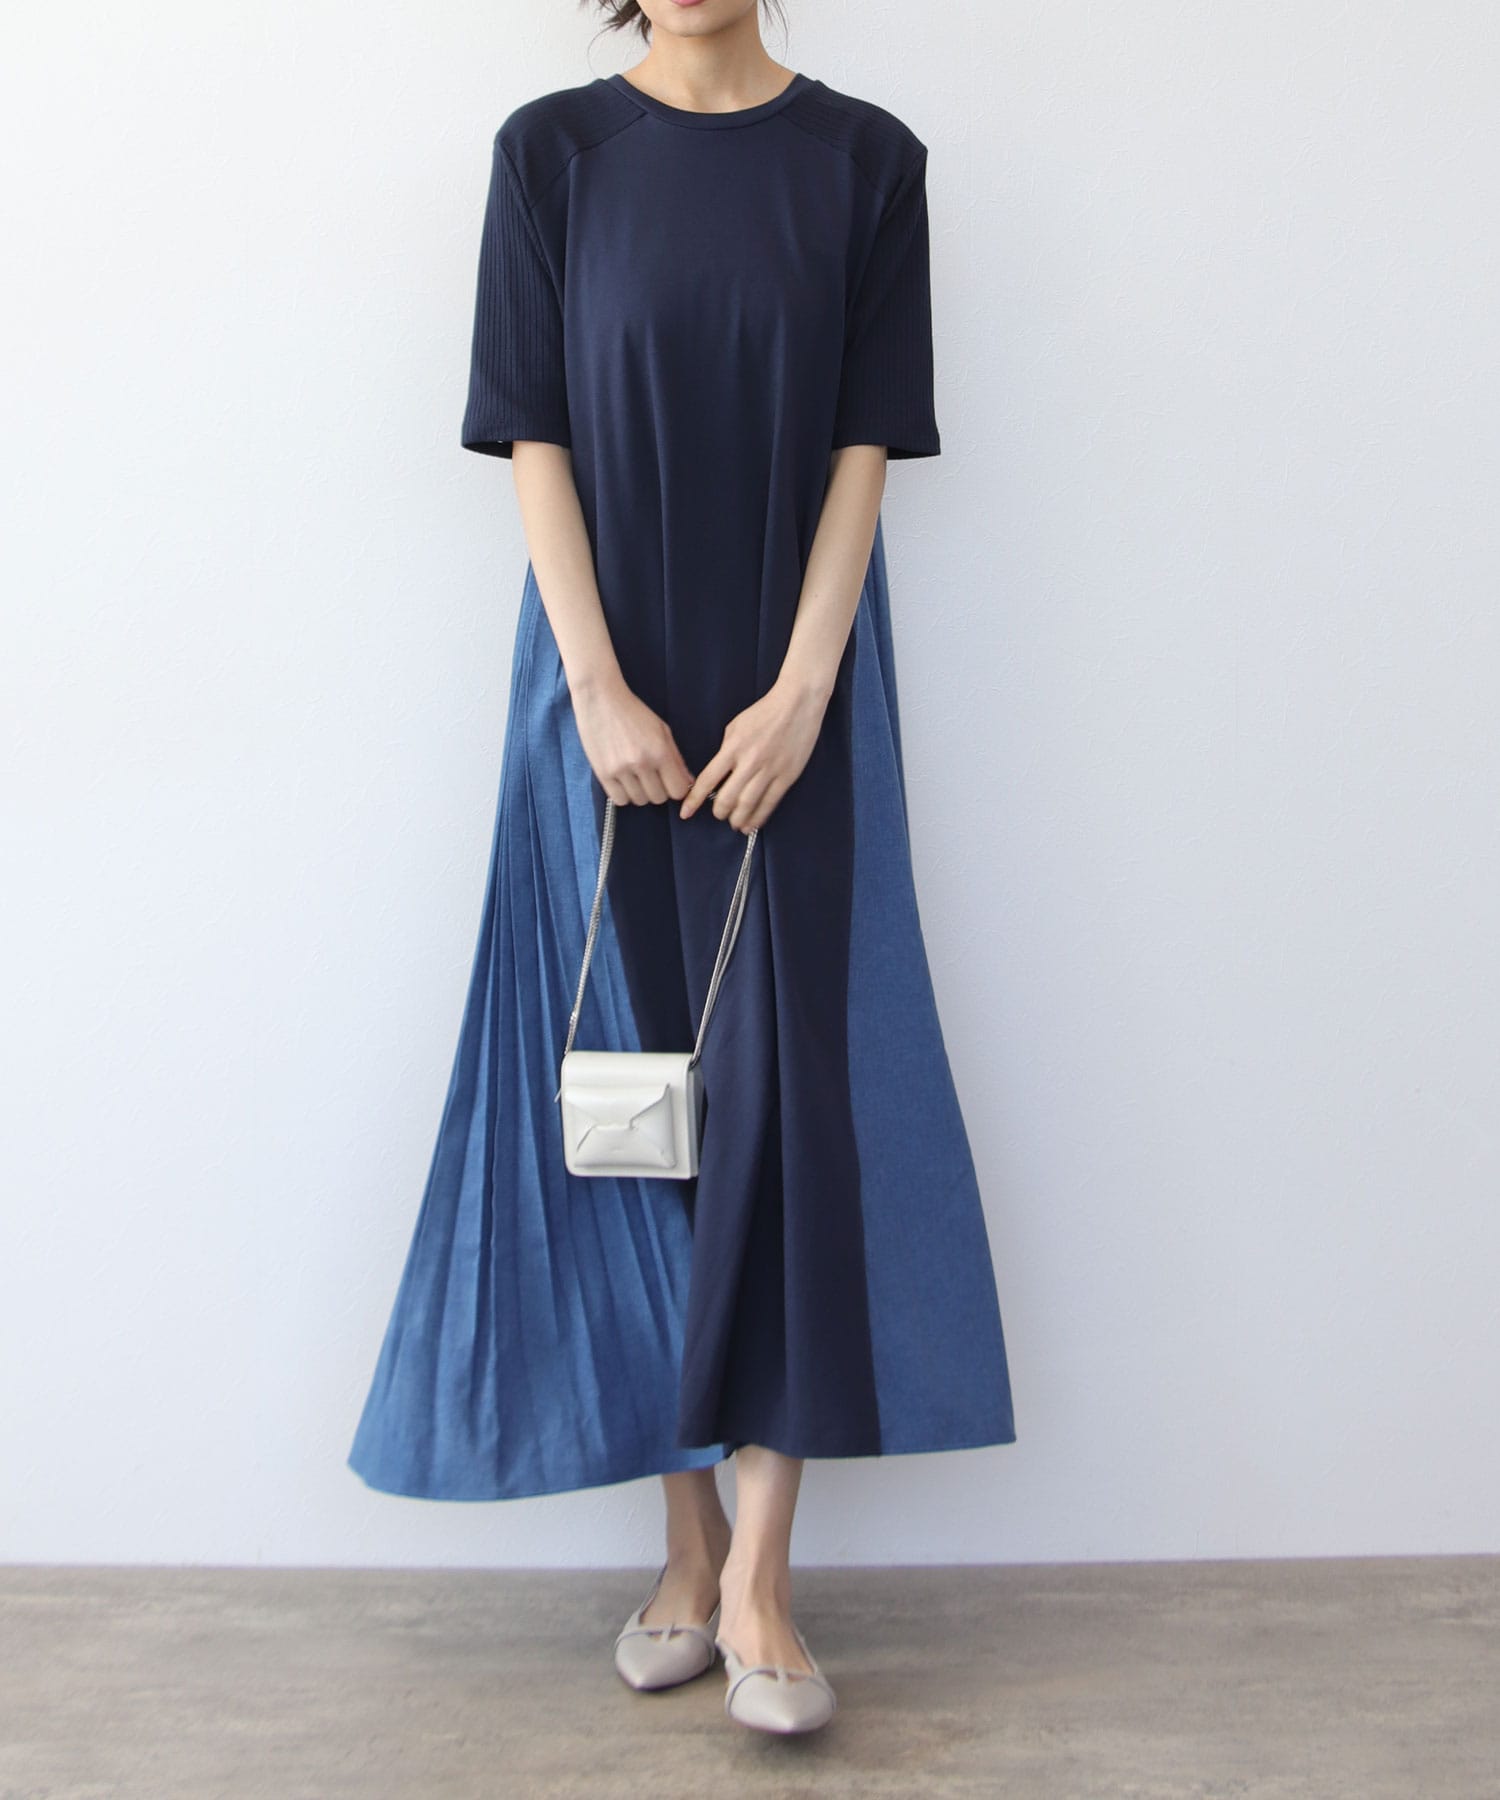 MARECHAL TERRE」の検索結果 | AND ON JIONE STORE（アンドオン